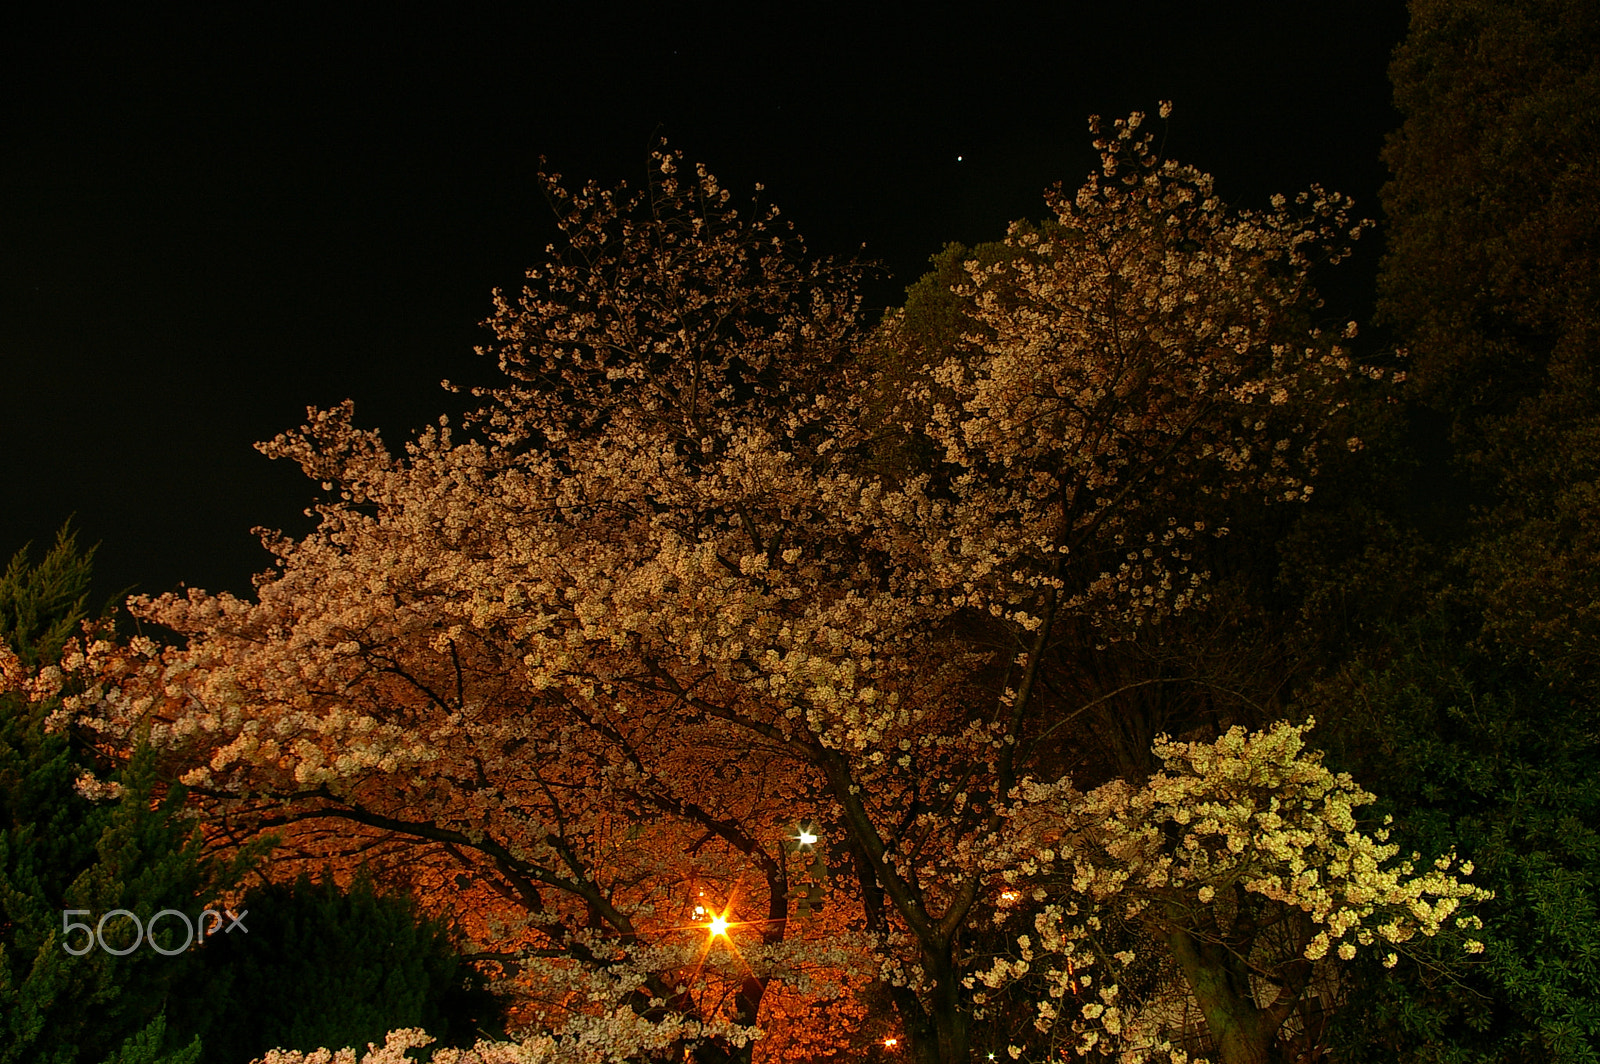 Pentax *ist DS2 sample photo. Sakura in a commuter town photography